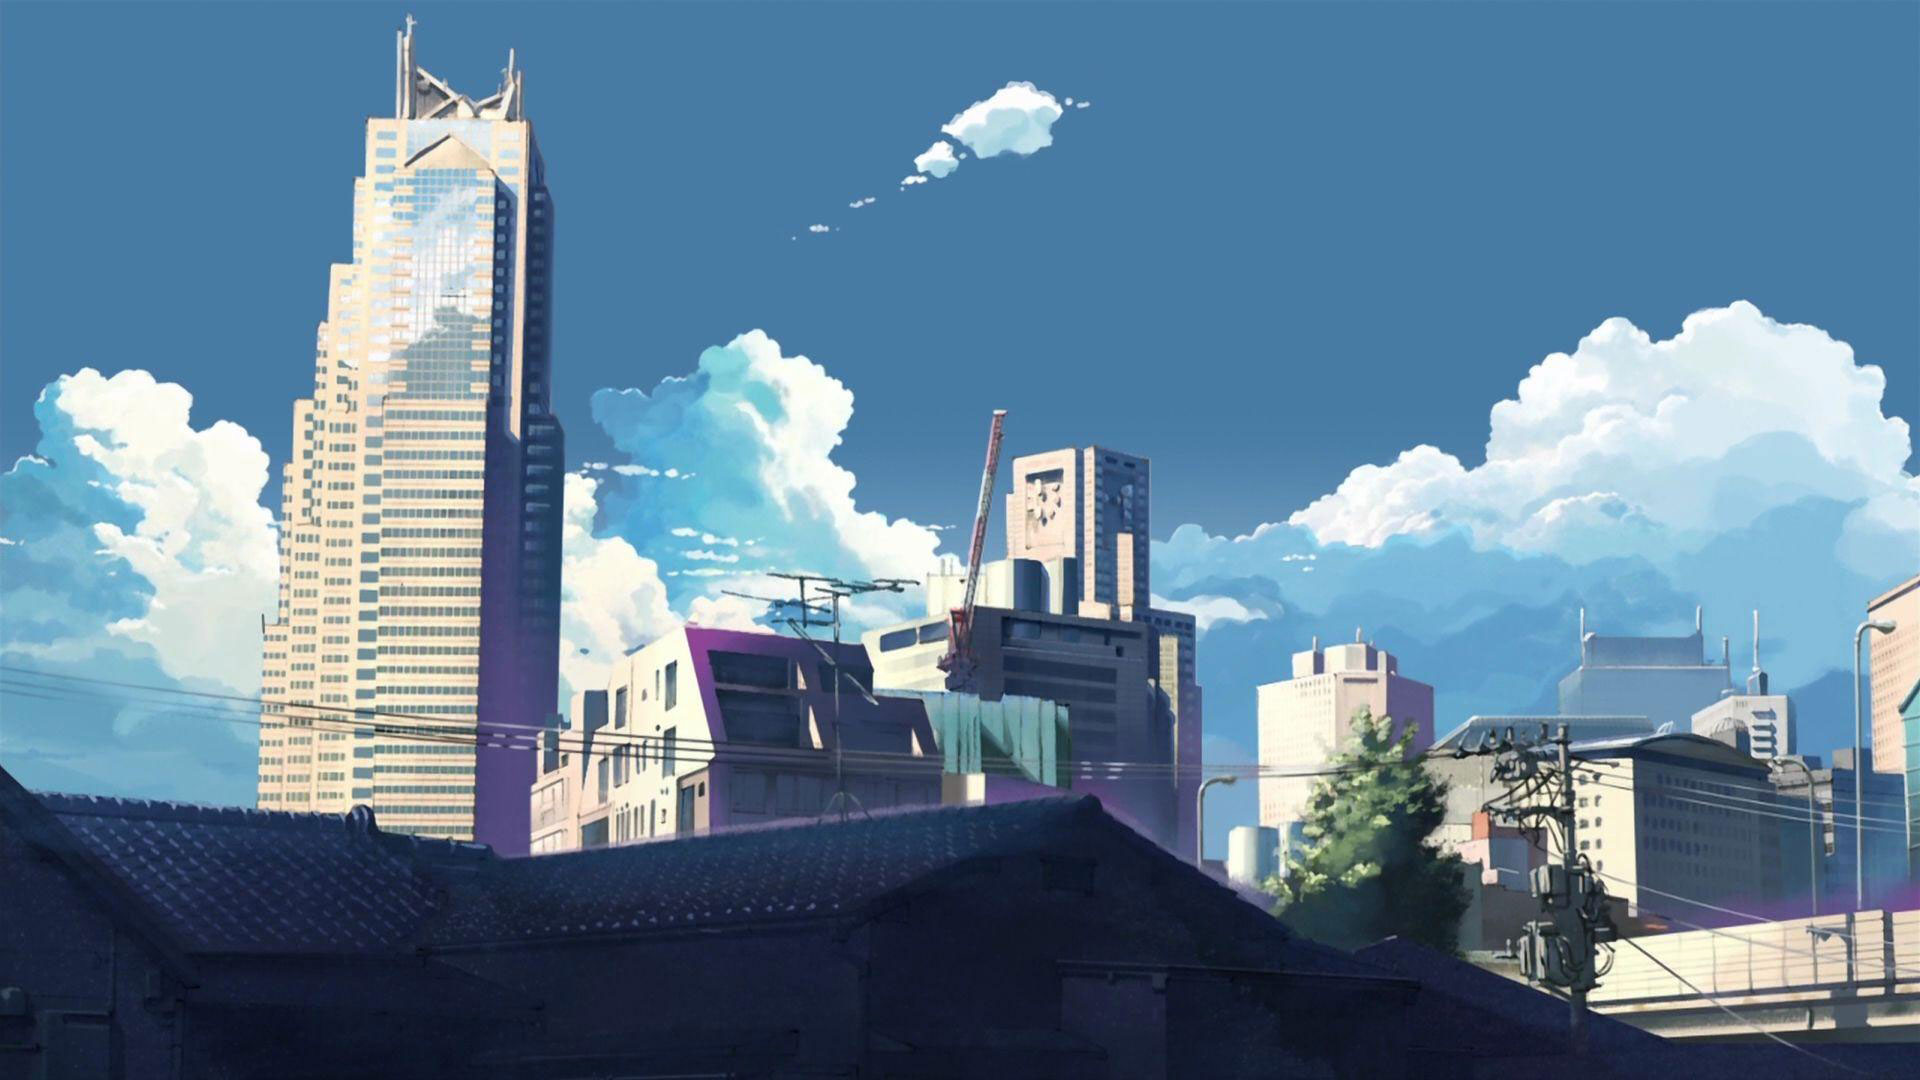 220+ Anime Landscape HD Wallpapers and Backgrounds